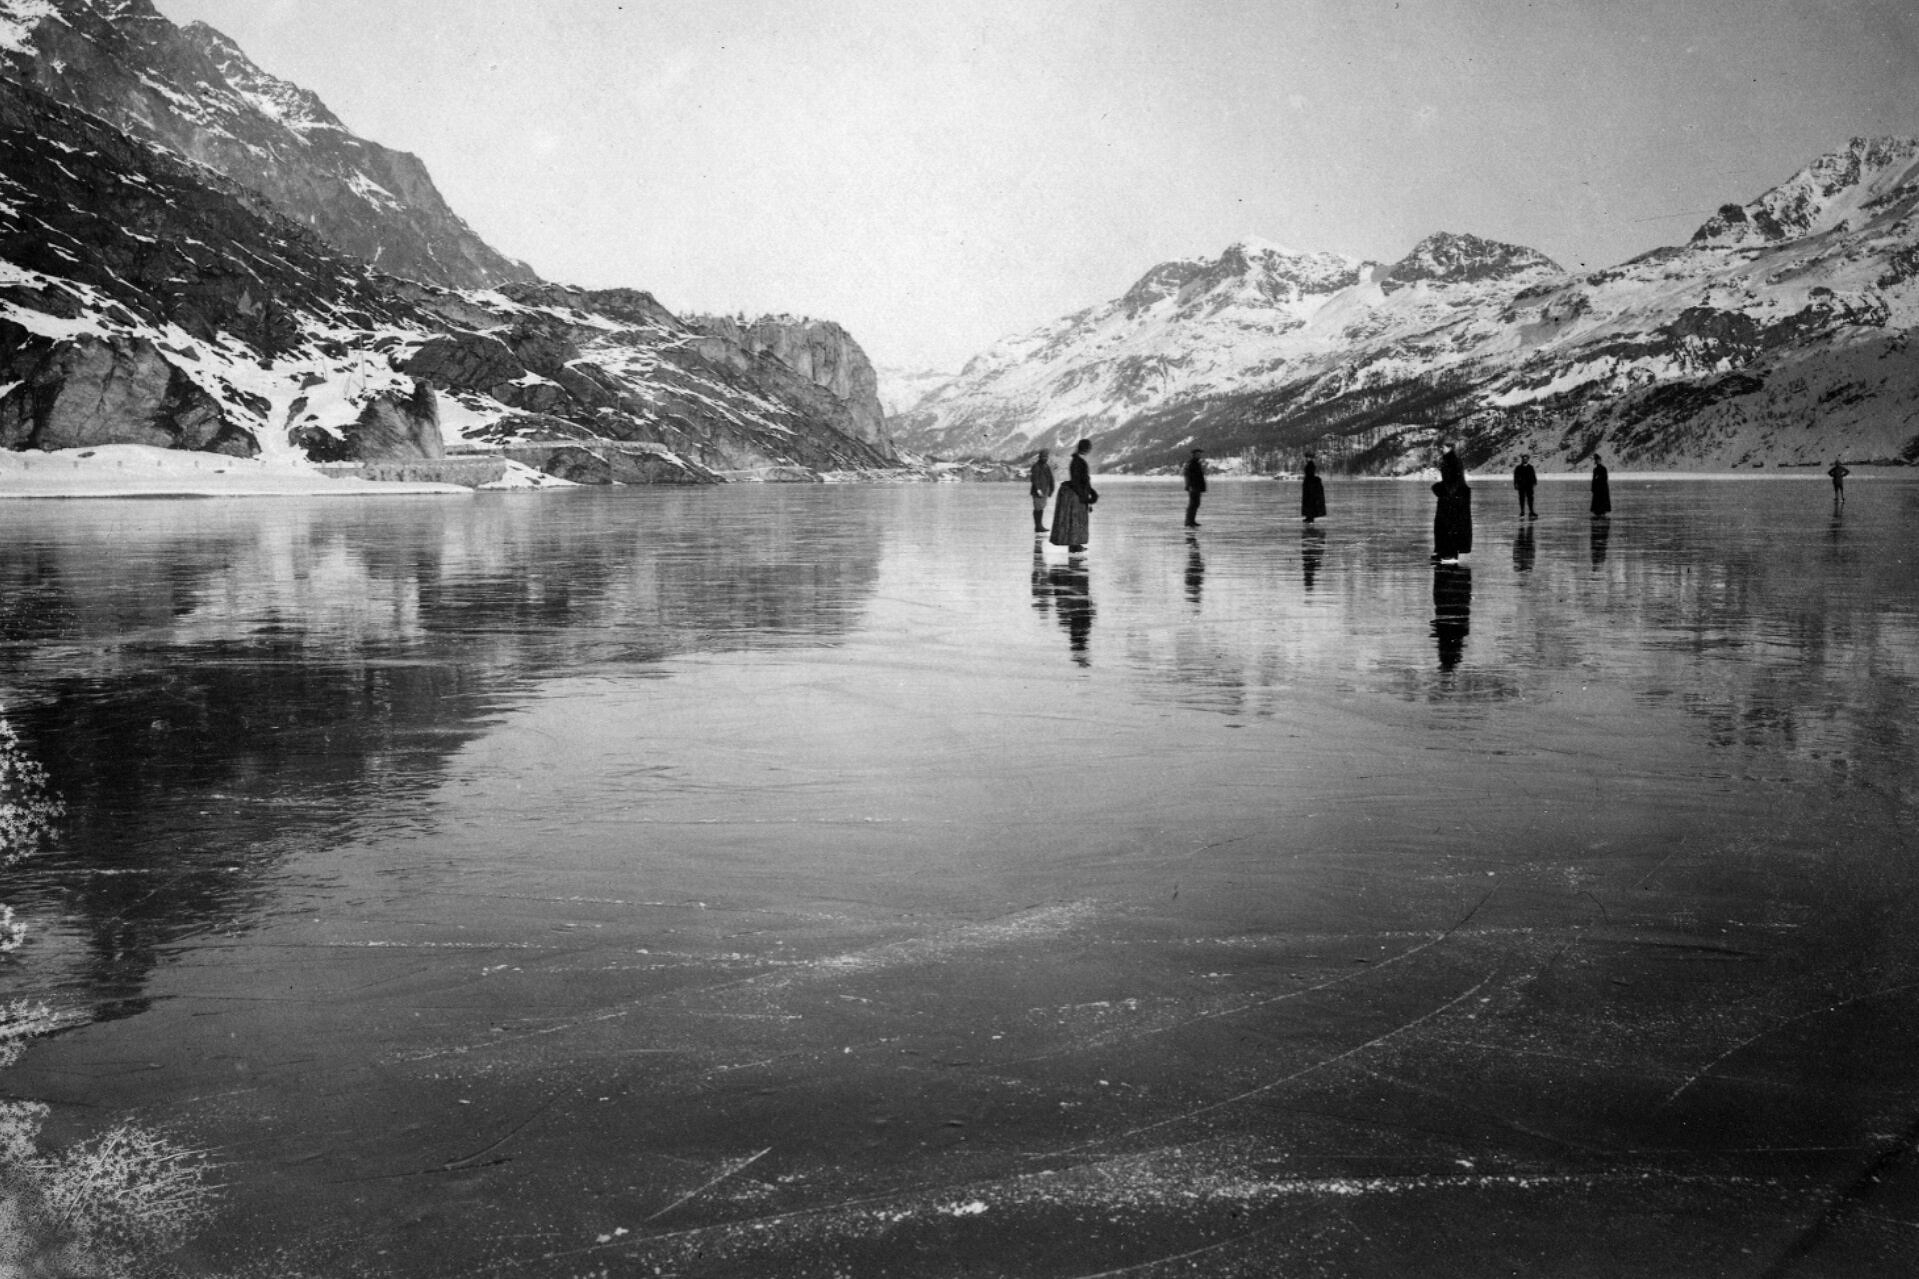 Skating on Lake Sils, by Elizabeth Le Blond. The Pigeon sisters would have undertaken similar activities in similar outfits  © Wikimedia Commons